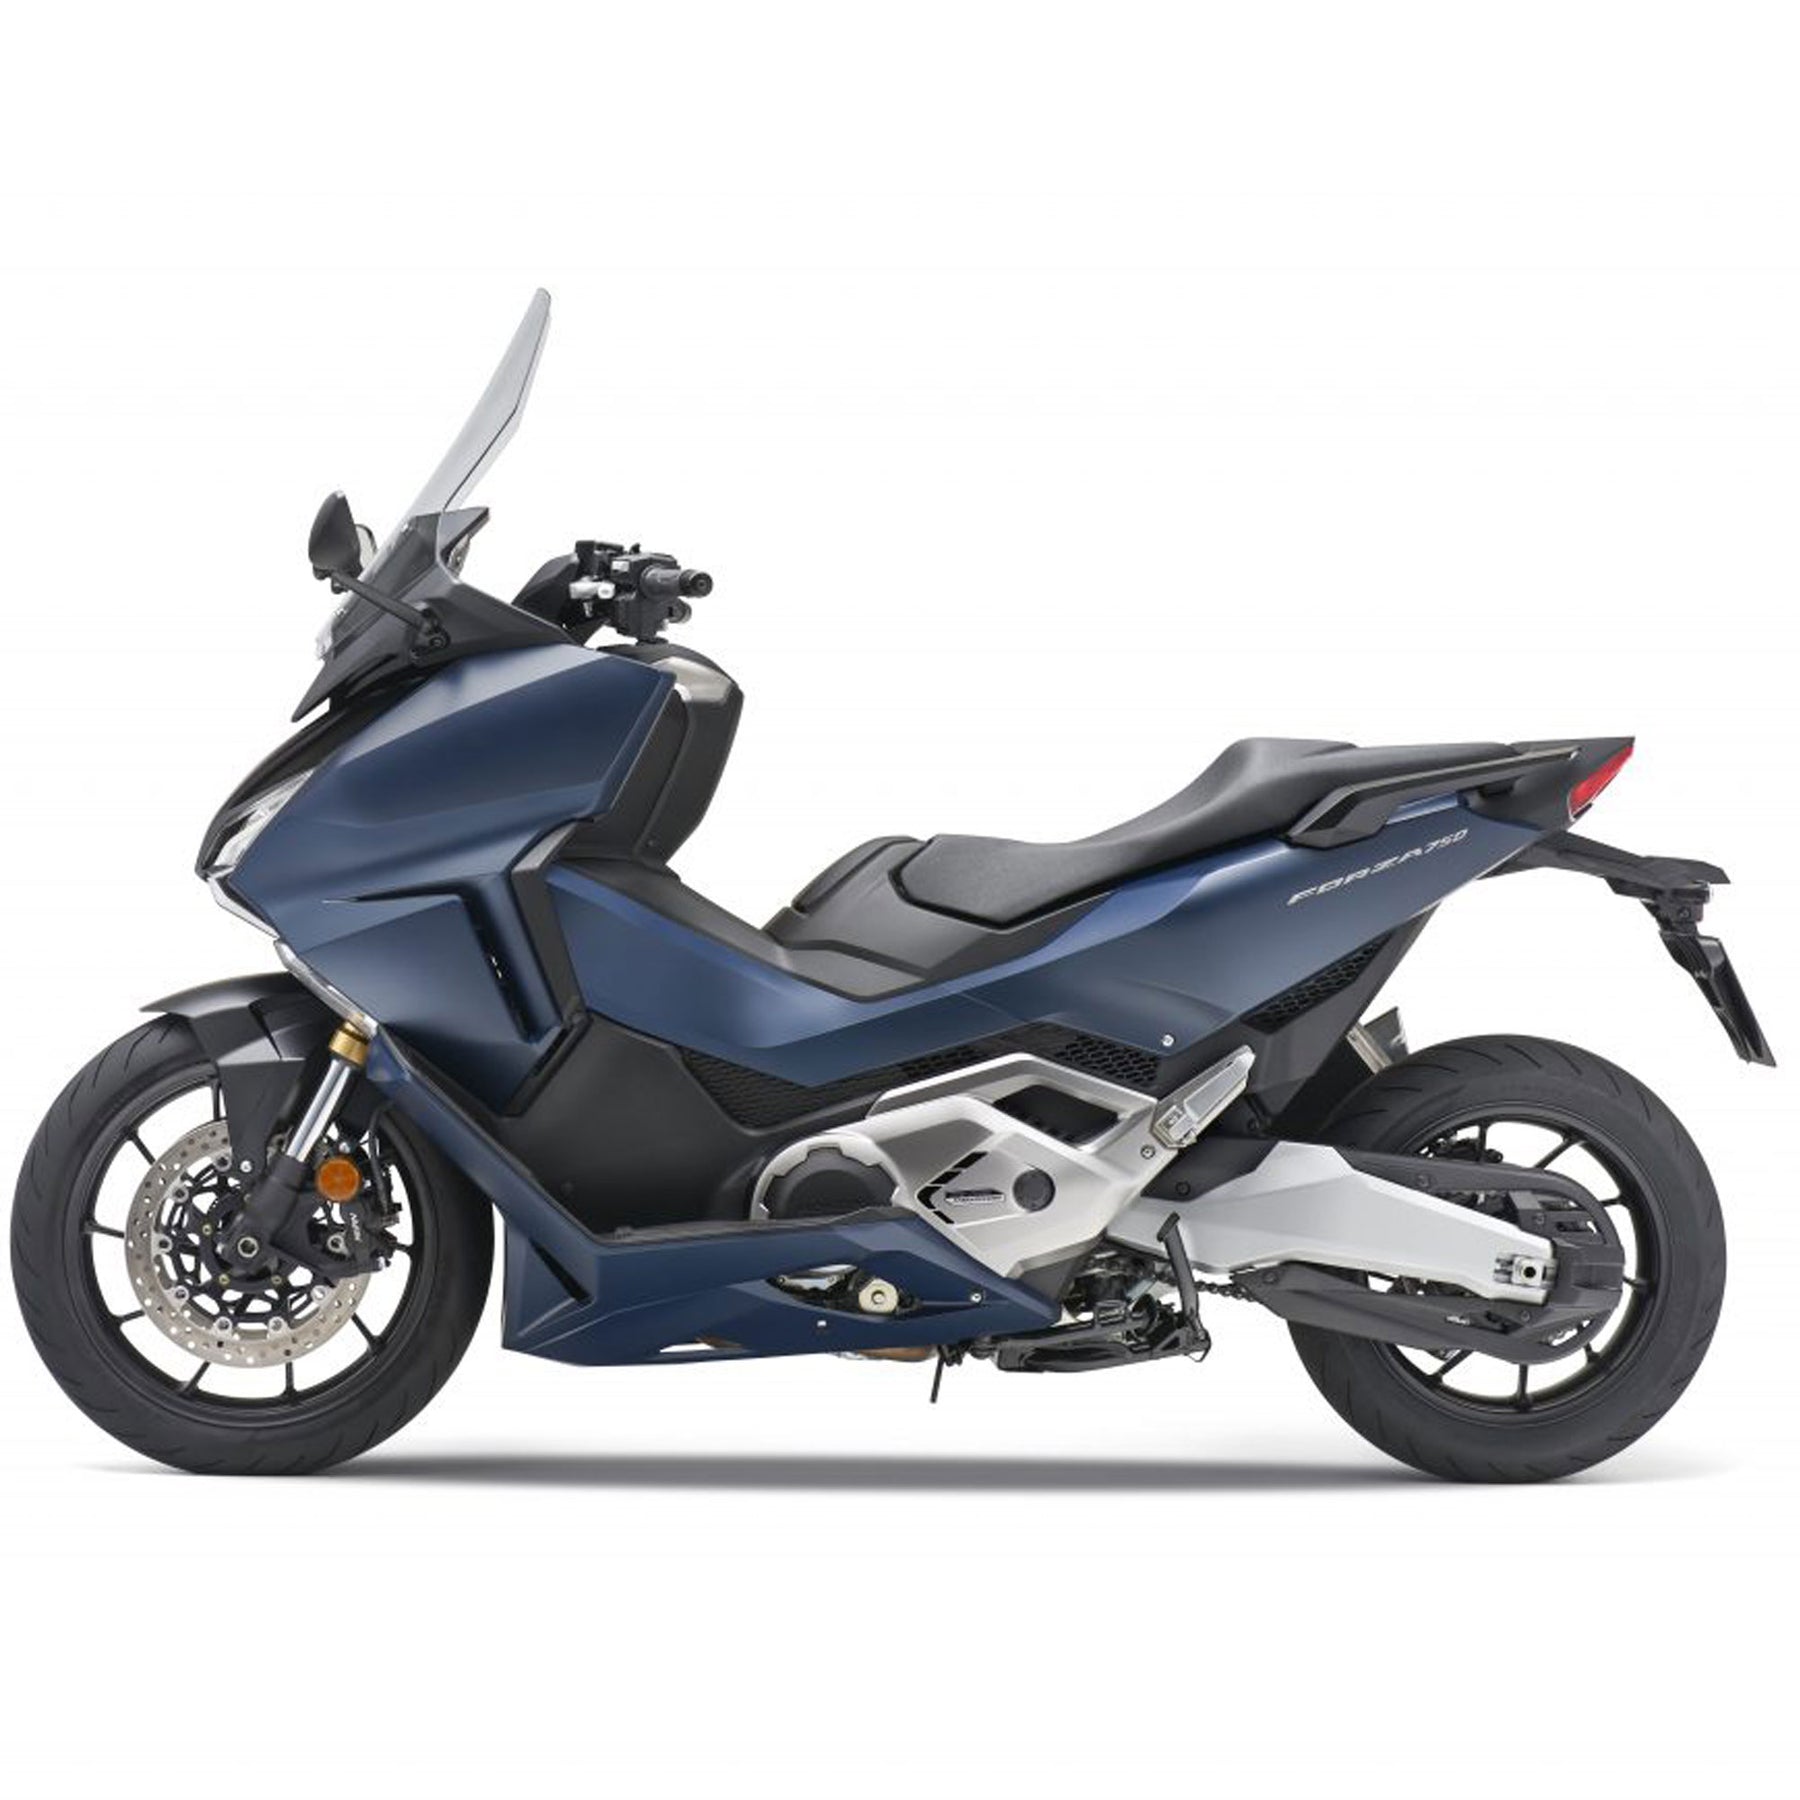 Scooters for Sale Bournemouth | Honda of Bournemouth | Forza 750